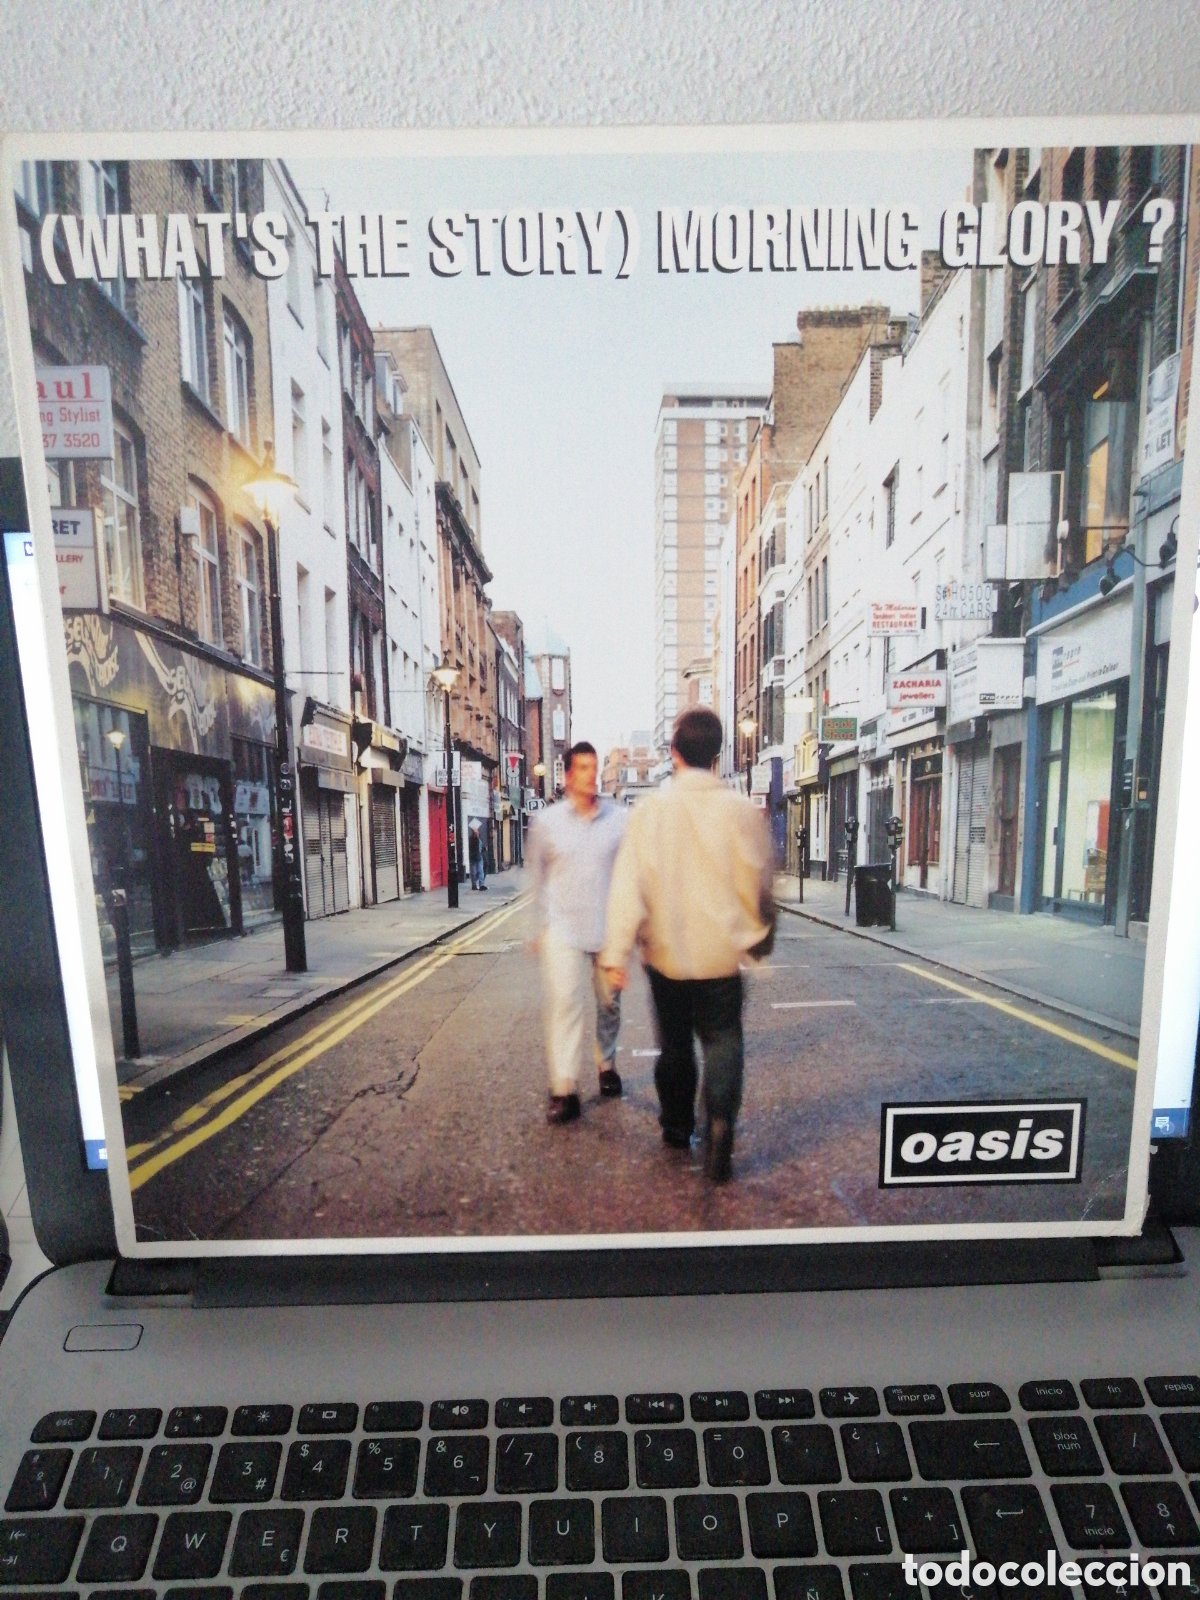 Oasis - (What's The Story) Morning Glory? Vinilo